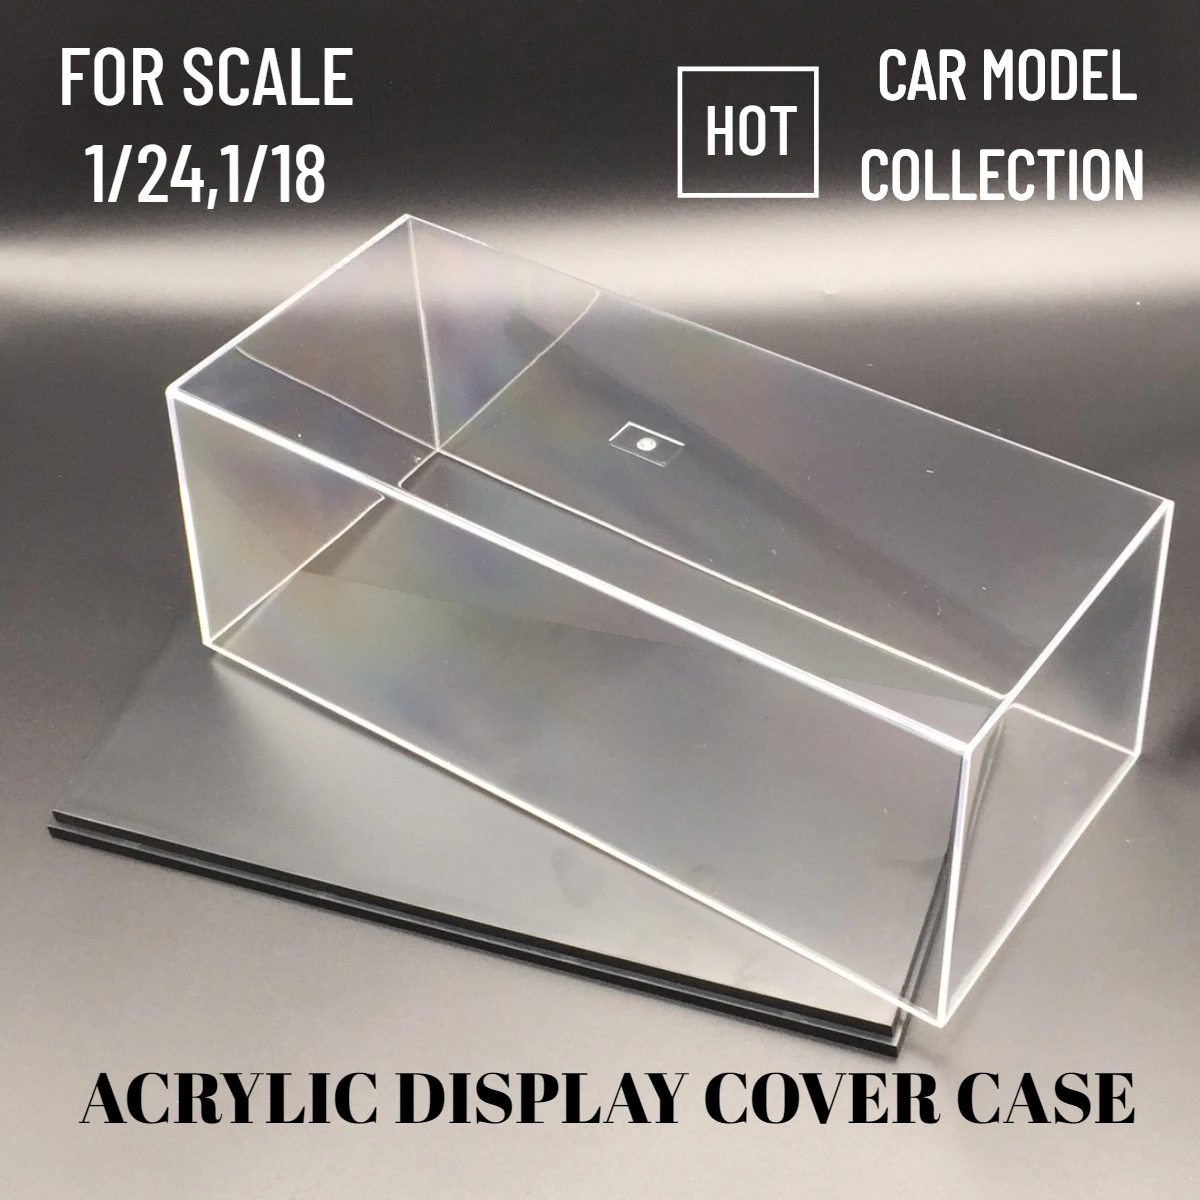 Scale 1:24 1:18 Car Model Display Case Transparent Acrylic Dust Proof Hard Cover PVC Box for Figure Collectible Miniature model car acrylic case display box cover transparent dust proof whole window 16cm 1 43 1 64